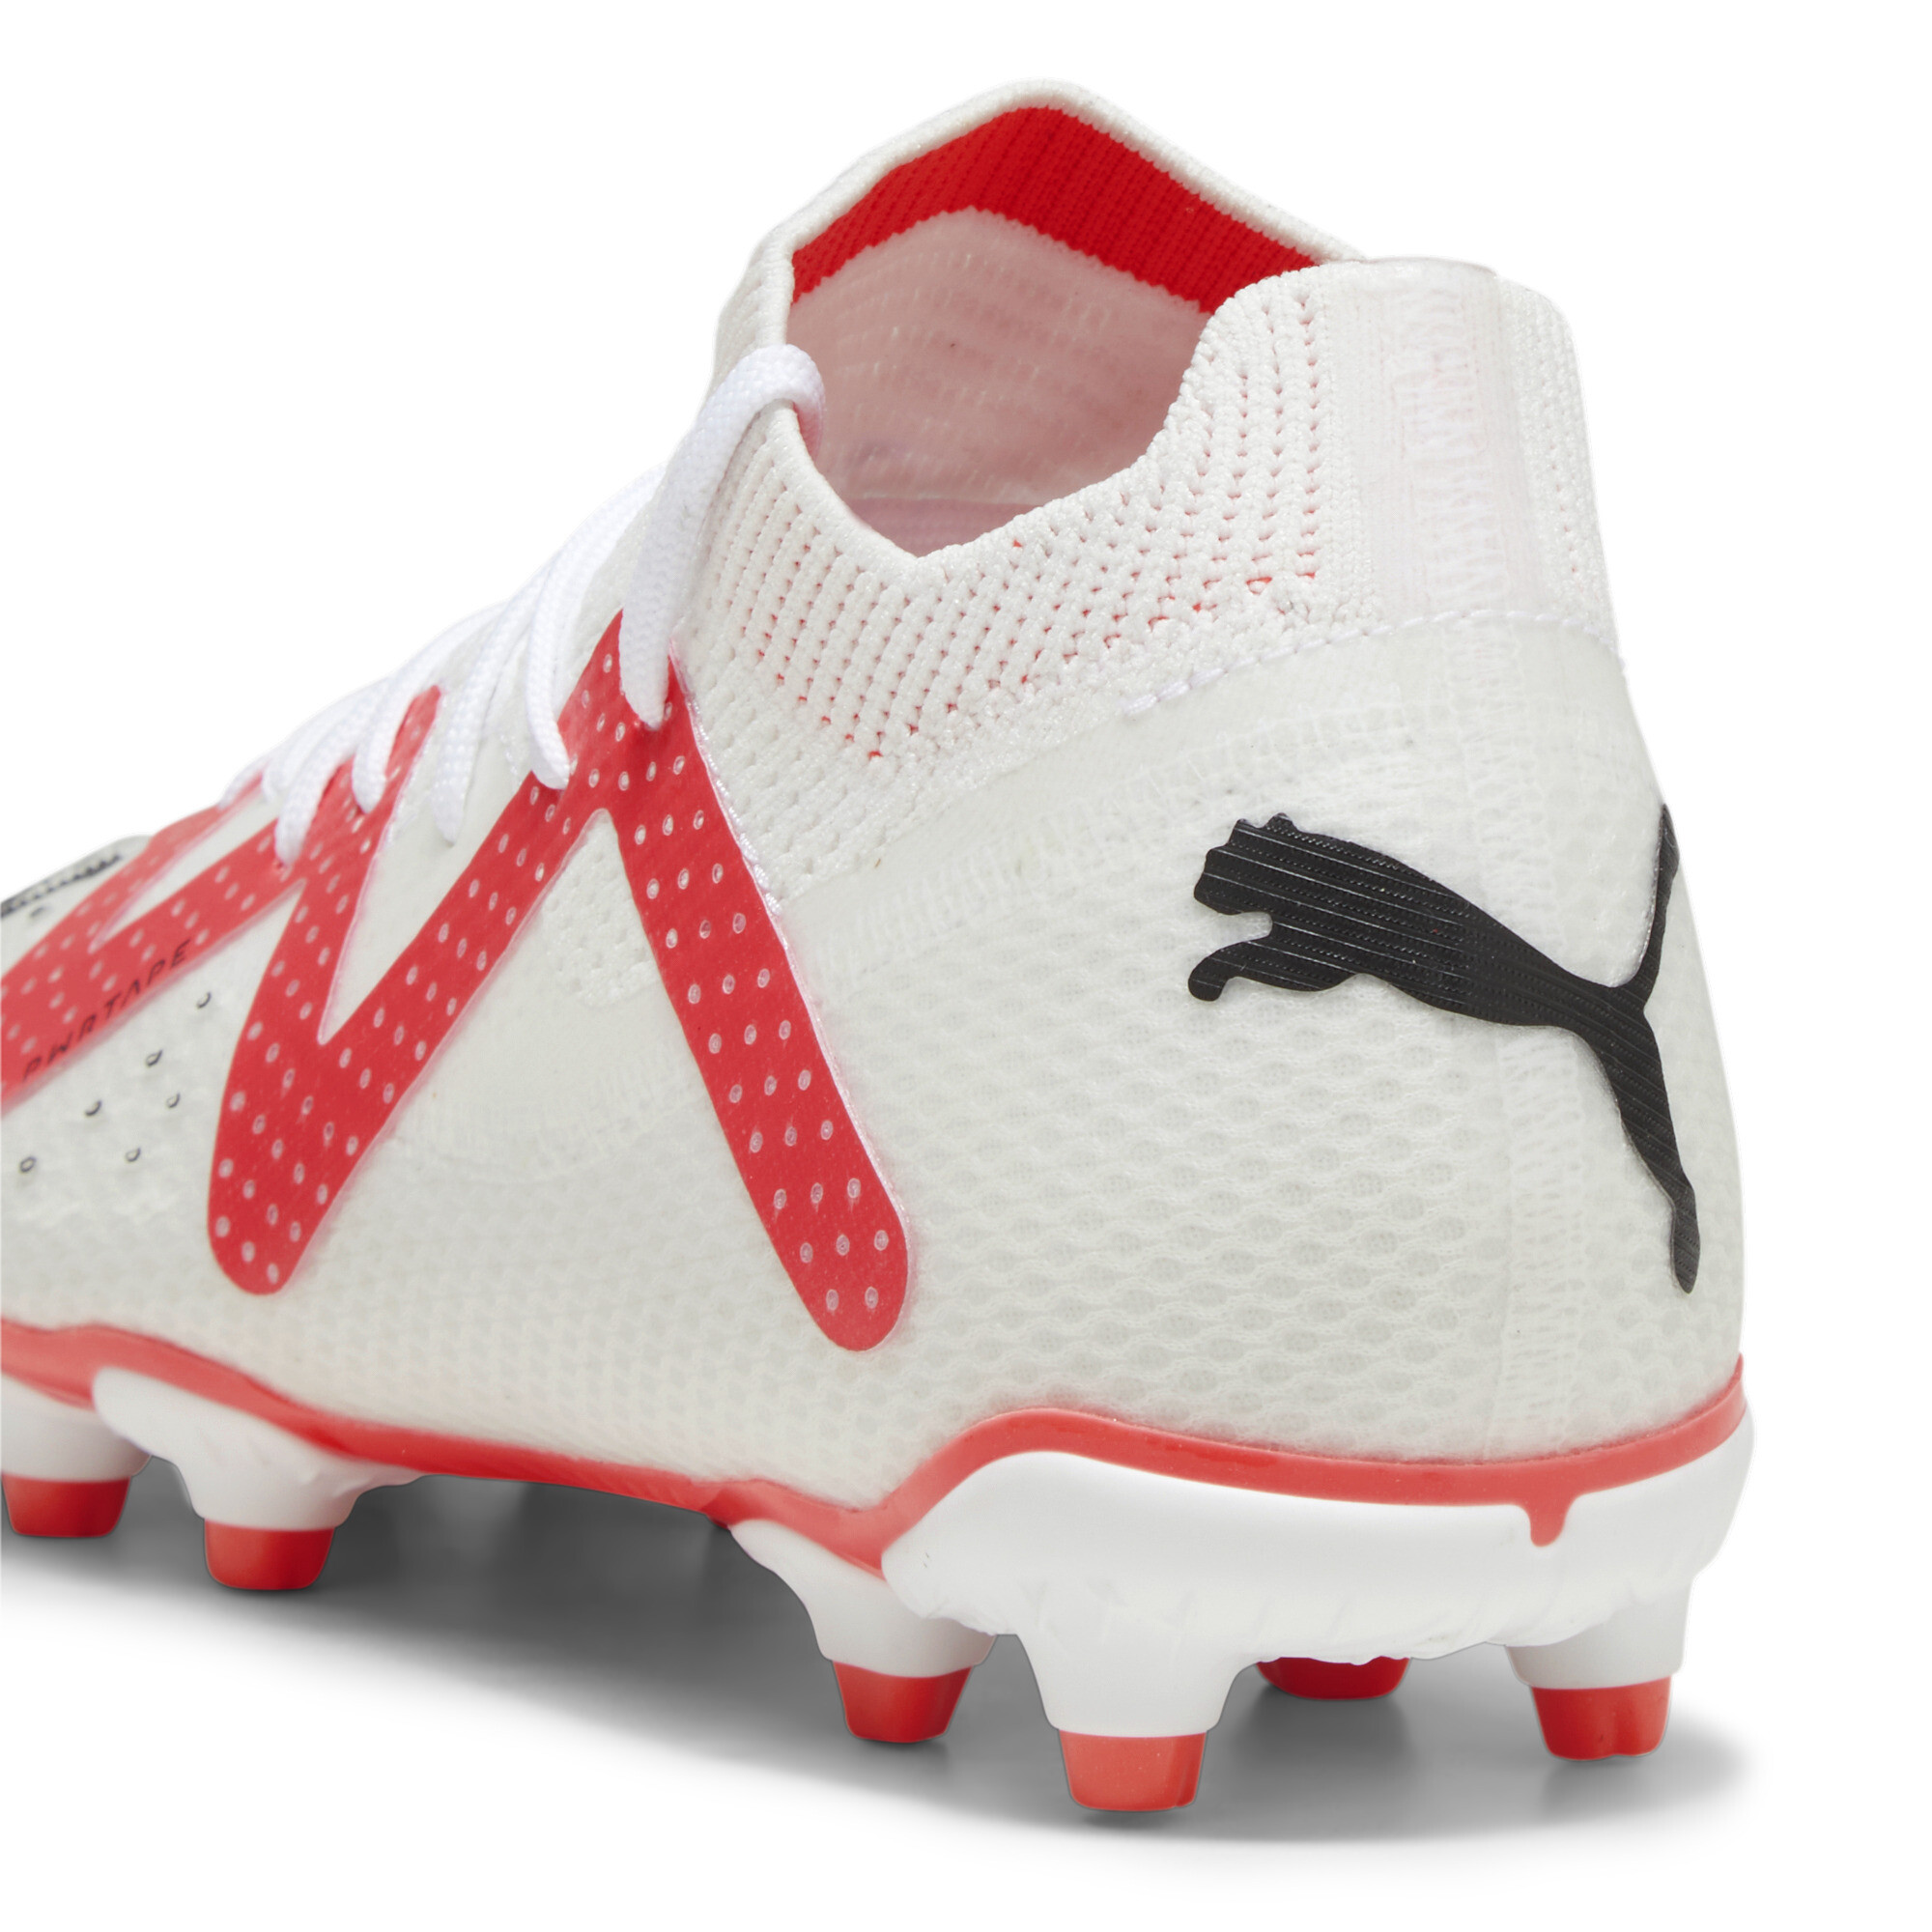 Puma FUTURE PRO FG/AG Youth Football Boots, White, Size 33, Shoes